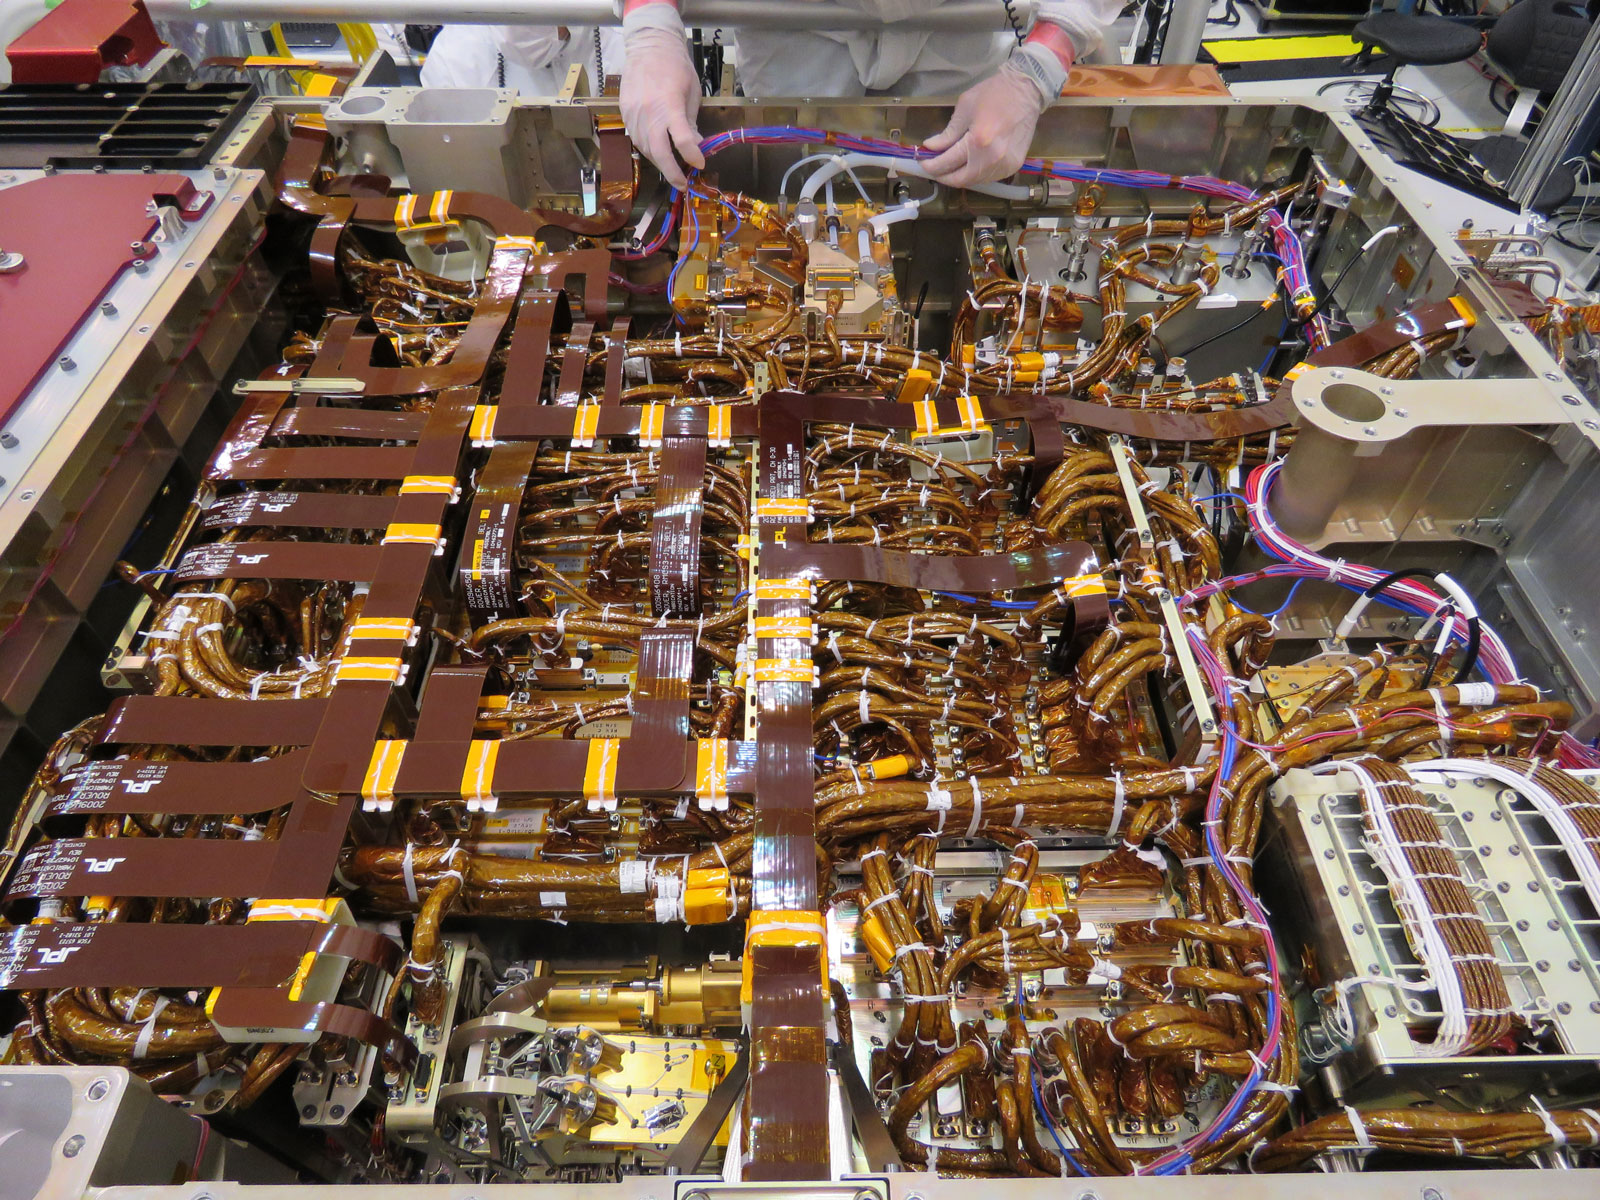 In this image, taken on June 1, 2019, an engineer in the Spacecraft Assembly Facility's High Bay 1 at NASA’s Jet Propulsion Laboratory in Pasadena, California, works on the exposed belly of the Mars 2020 rover. It has been inverted to allow the 2020 engineers and technicians easier access.